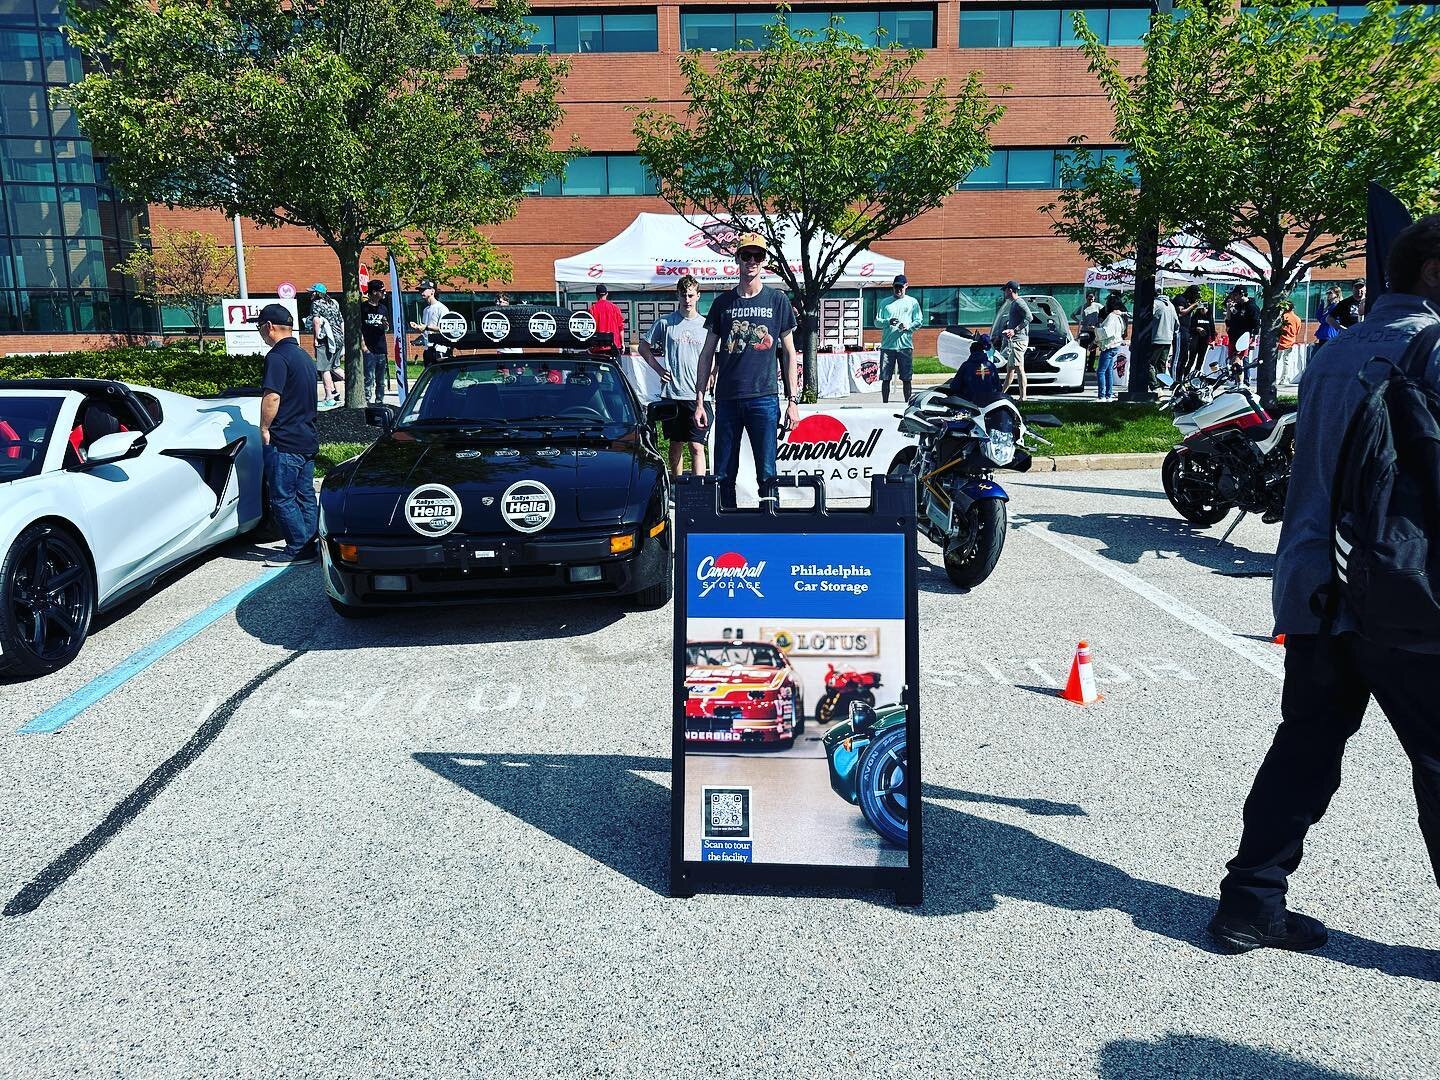 Good times @mainline_carsandcoffee yesterday. The new location is spot on and we met some great people with our Bimotas and 944 Safari. Looking forward to the next event on June 11th.

#carsandcoffee #cars #car #racecar #safari #bimota #carstorage #c